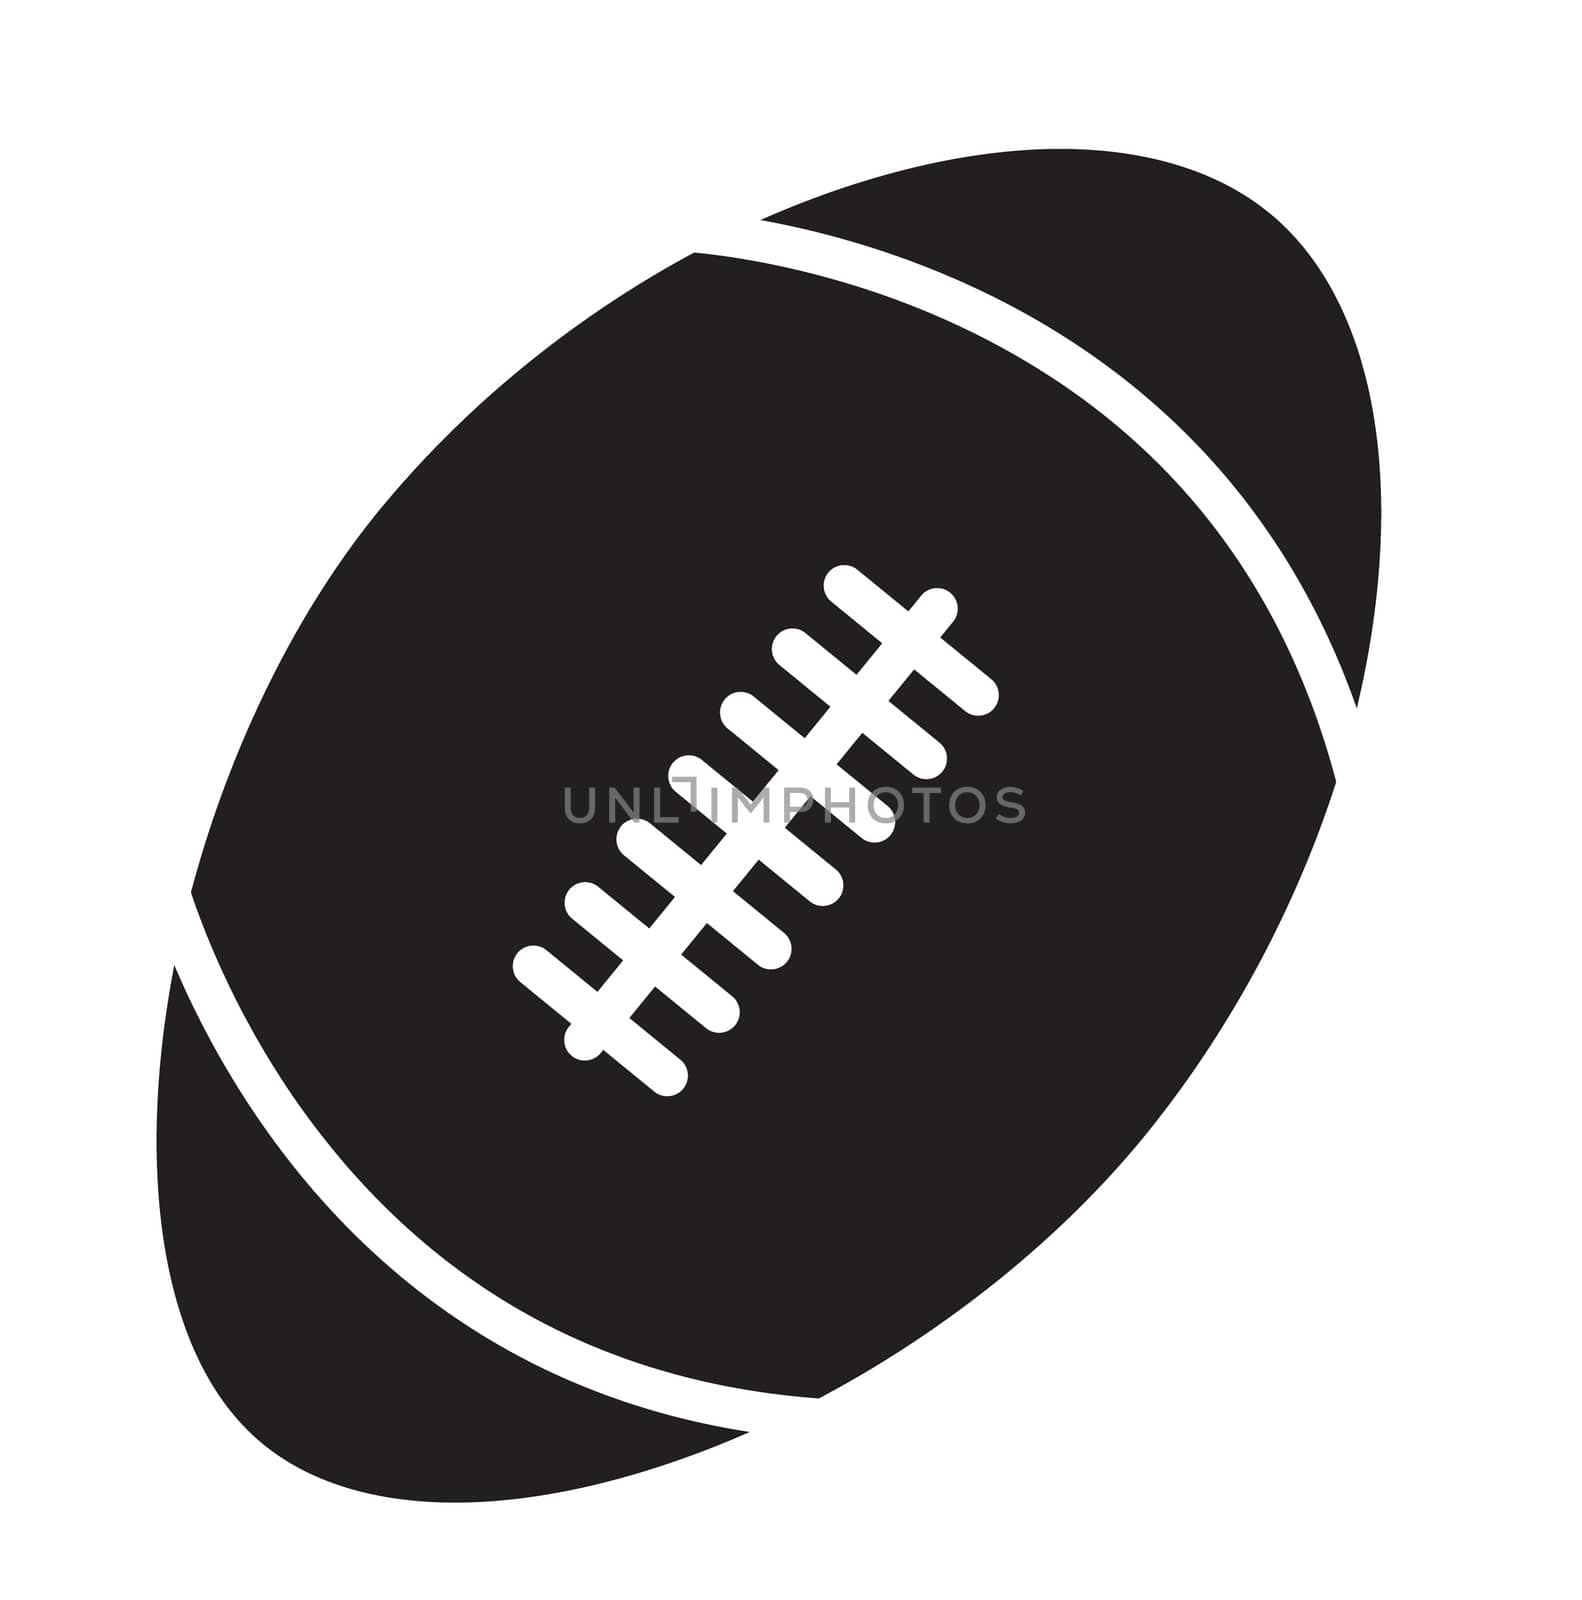 rugby ball icon on white background. rugby ball sign. flat style design.